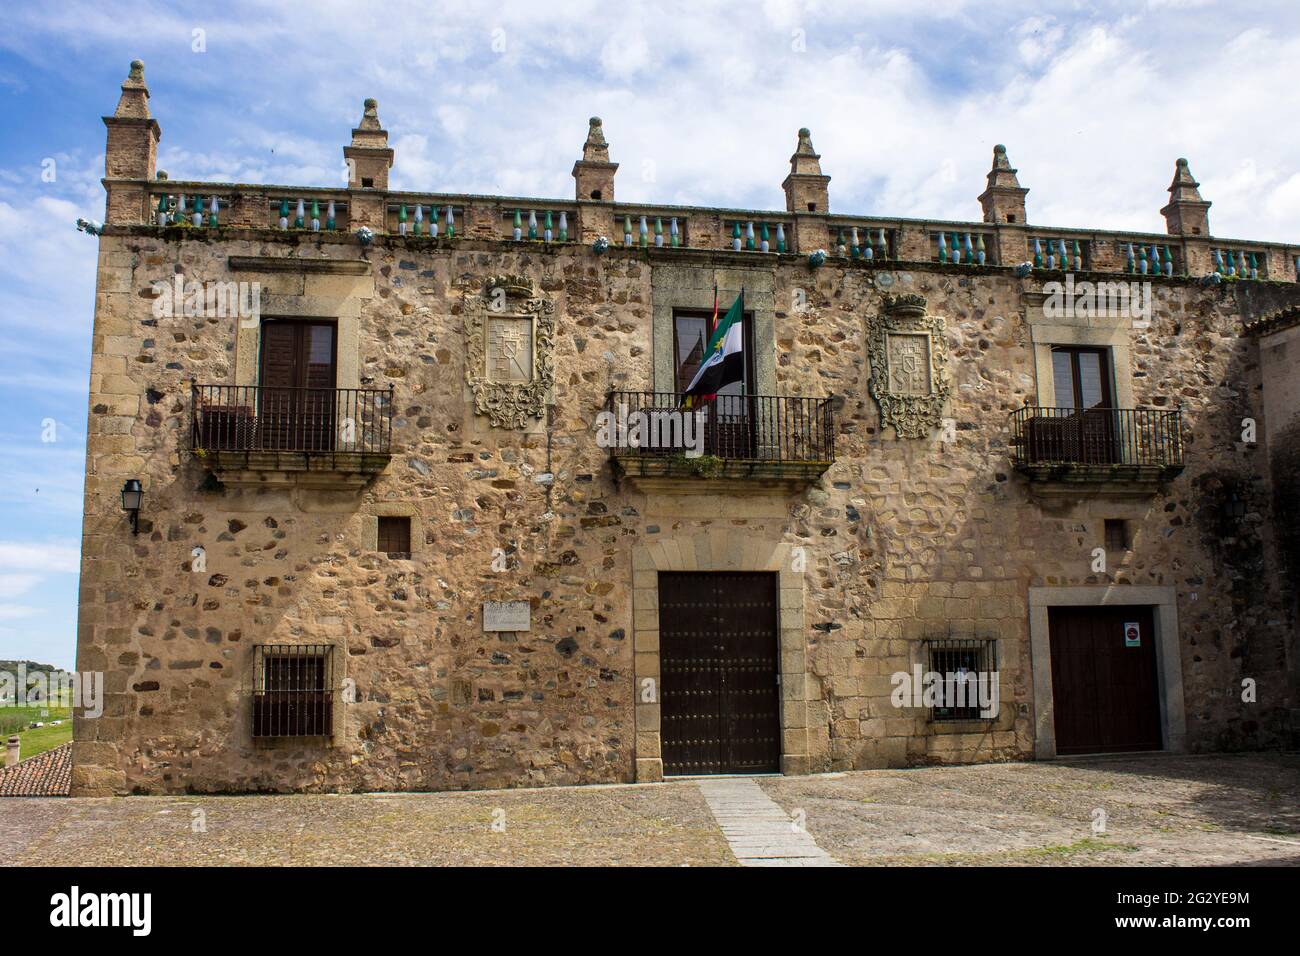 Caceres, Spain. The Palacio de las Veletas (Veletas Palace), sea of the Caceres Museum in the Old Monumental Town, a World Heritage Site Stock Photo